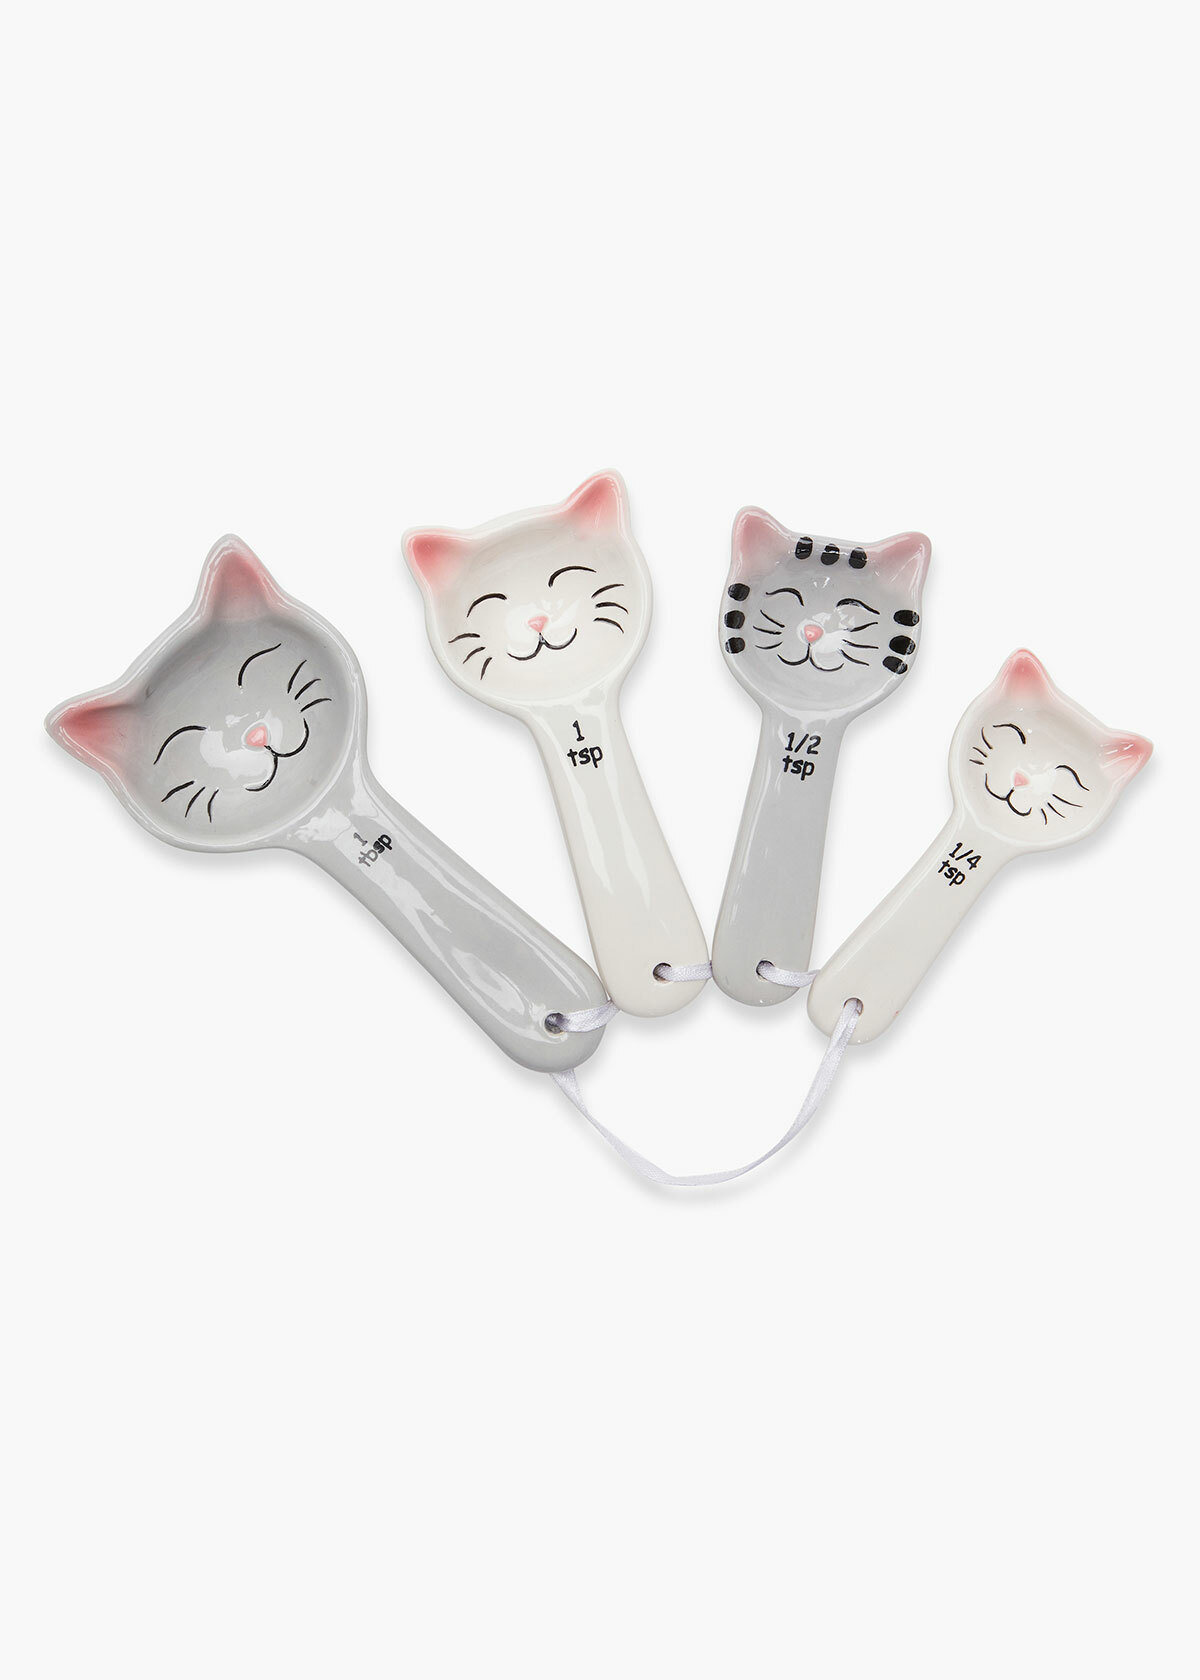 Toysdone Cat Shaped Ceramic Measuring Spoons - Perfect for Any Cat